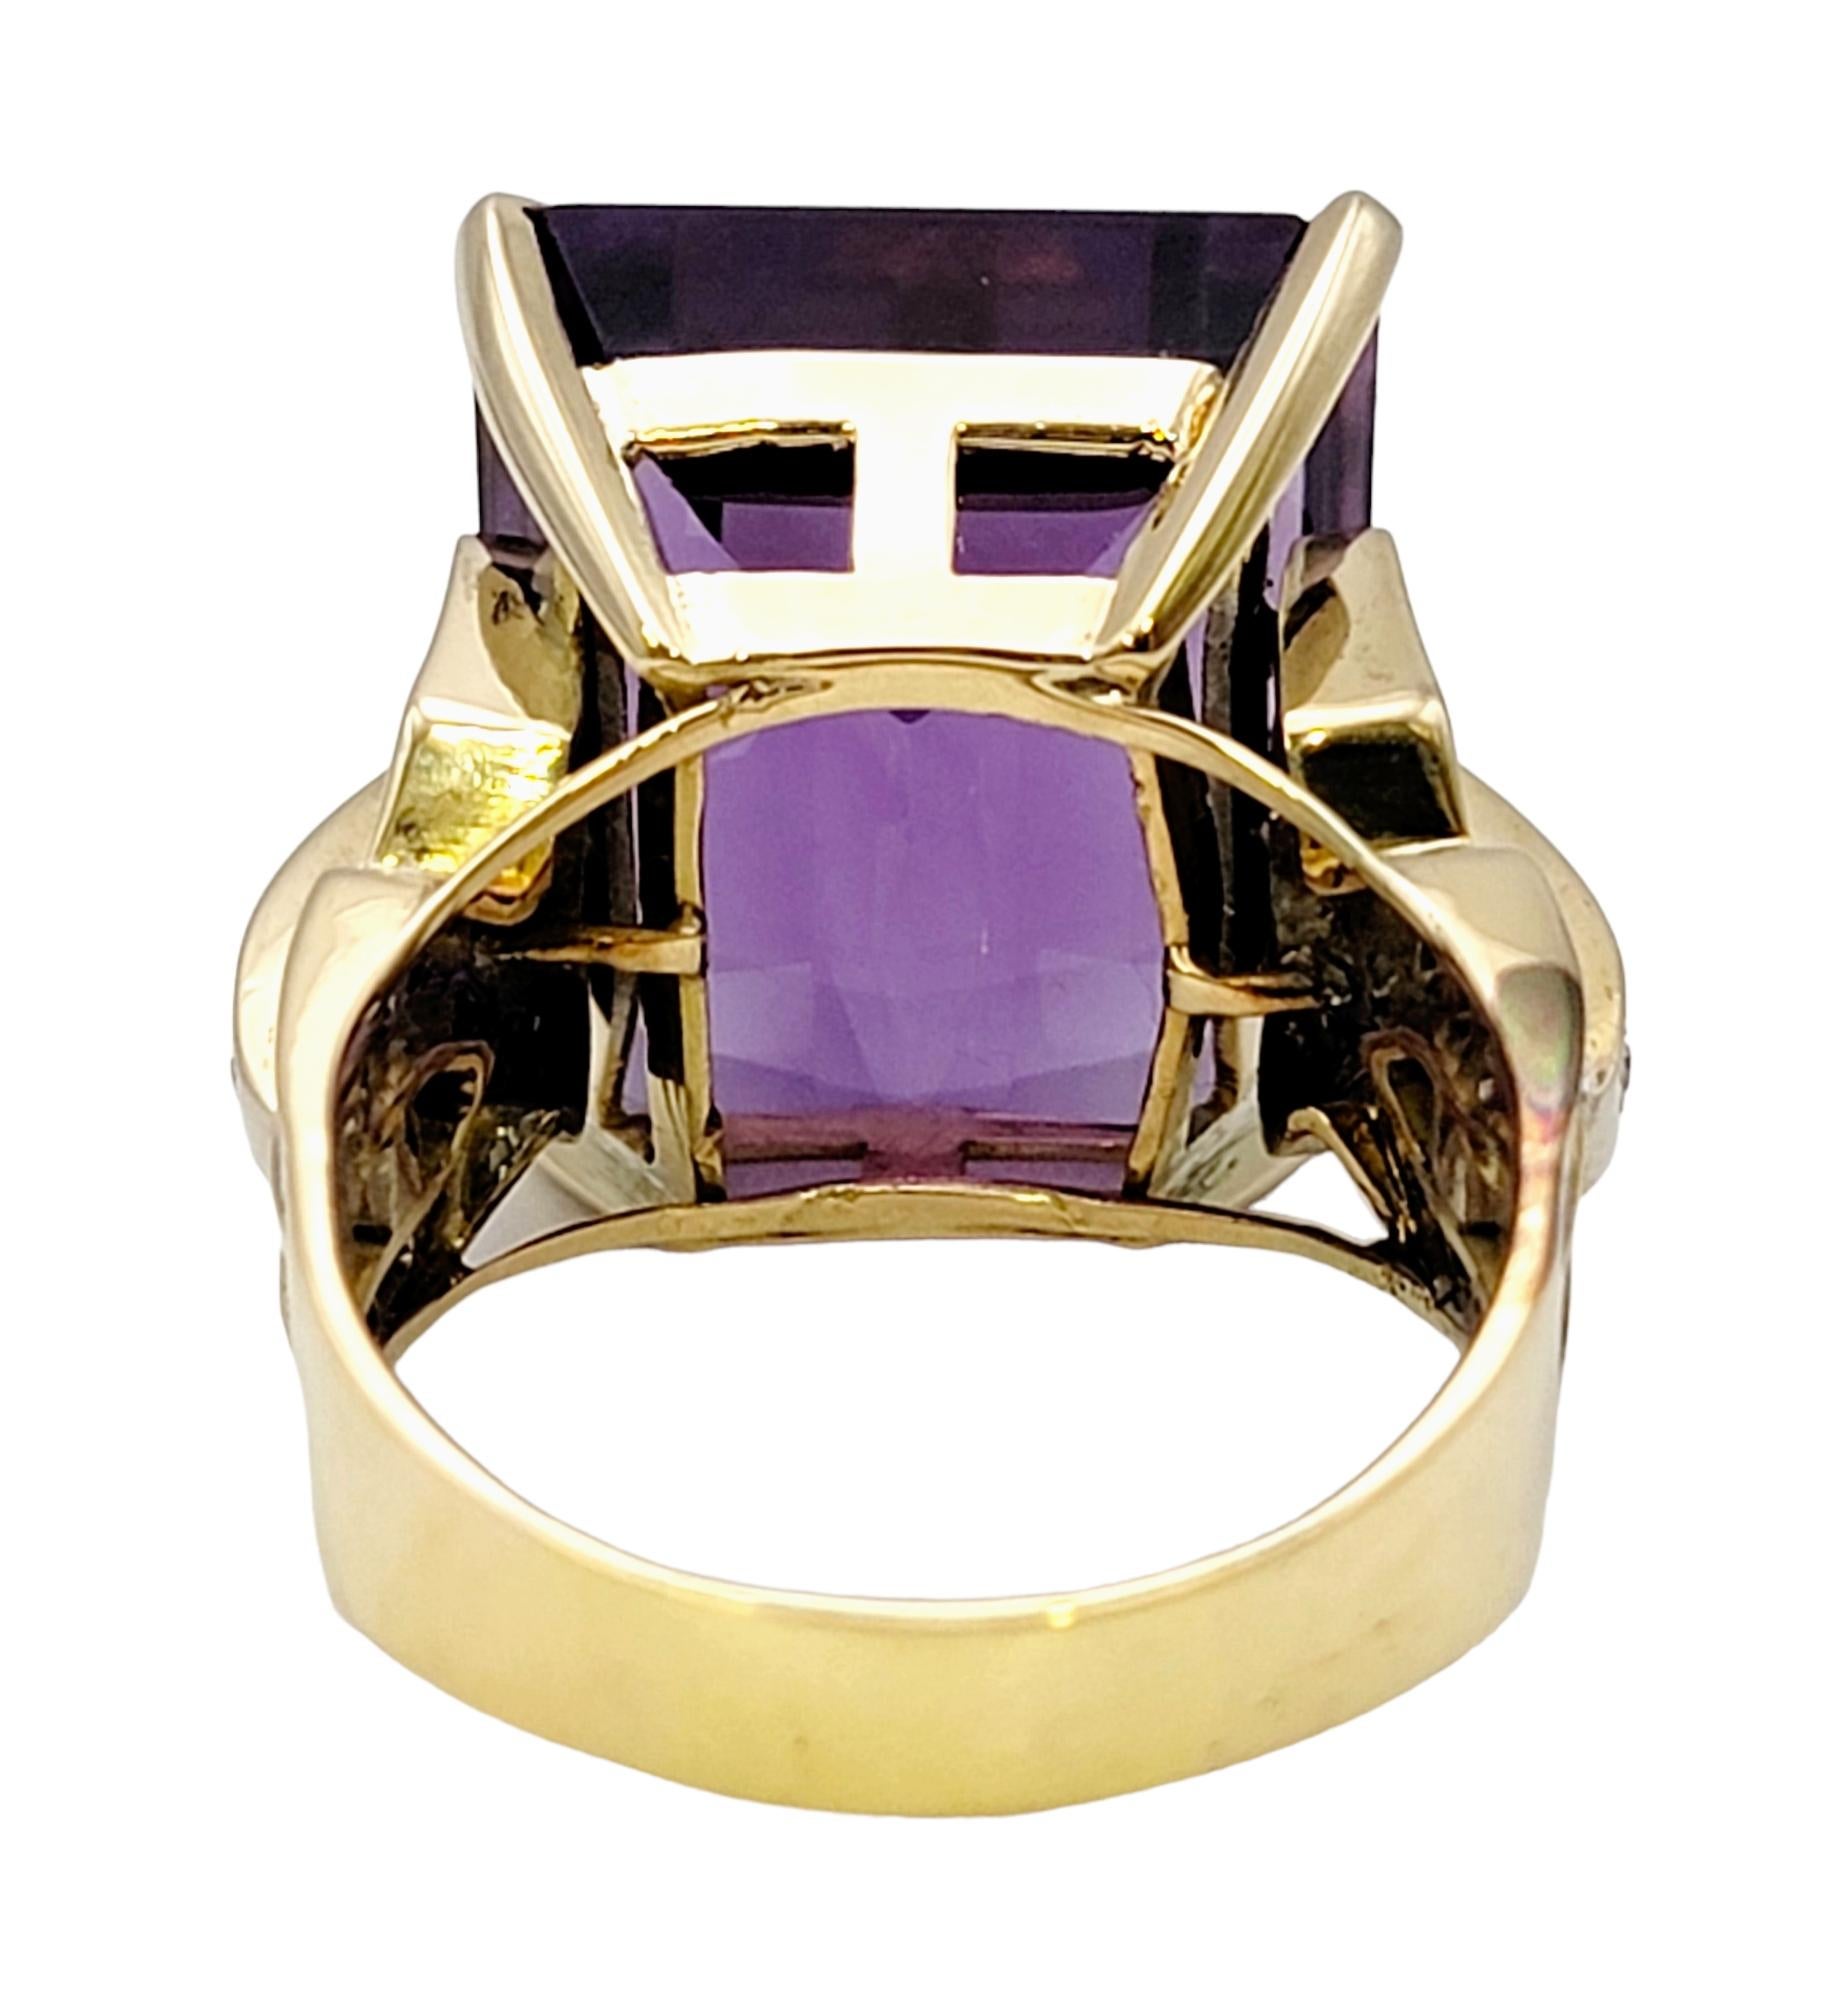 Huge 34.85 Carat Emerald Cut Amethyst Cocktail Ring with Side Diamond Detailing For Sale 2